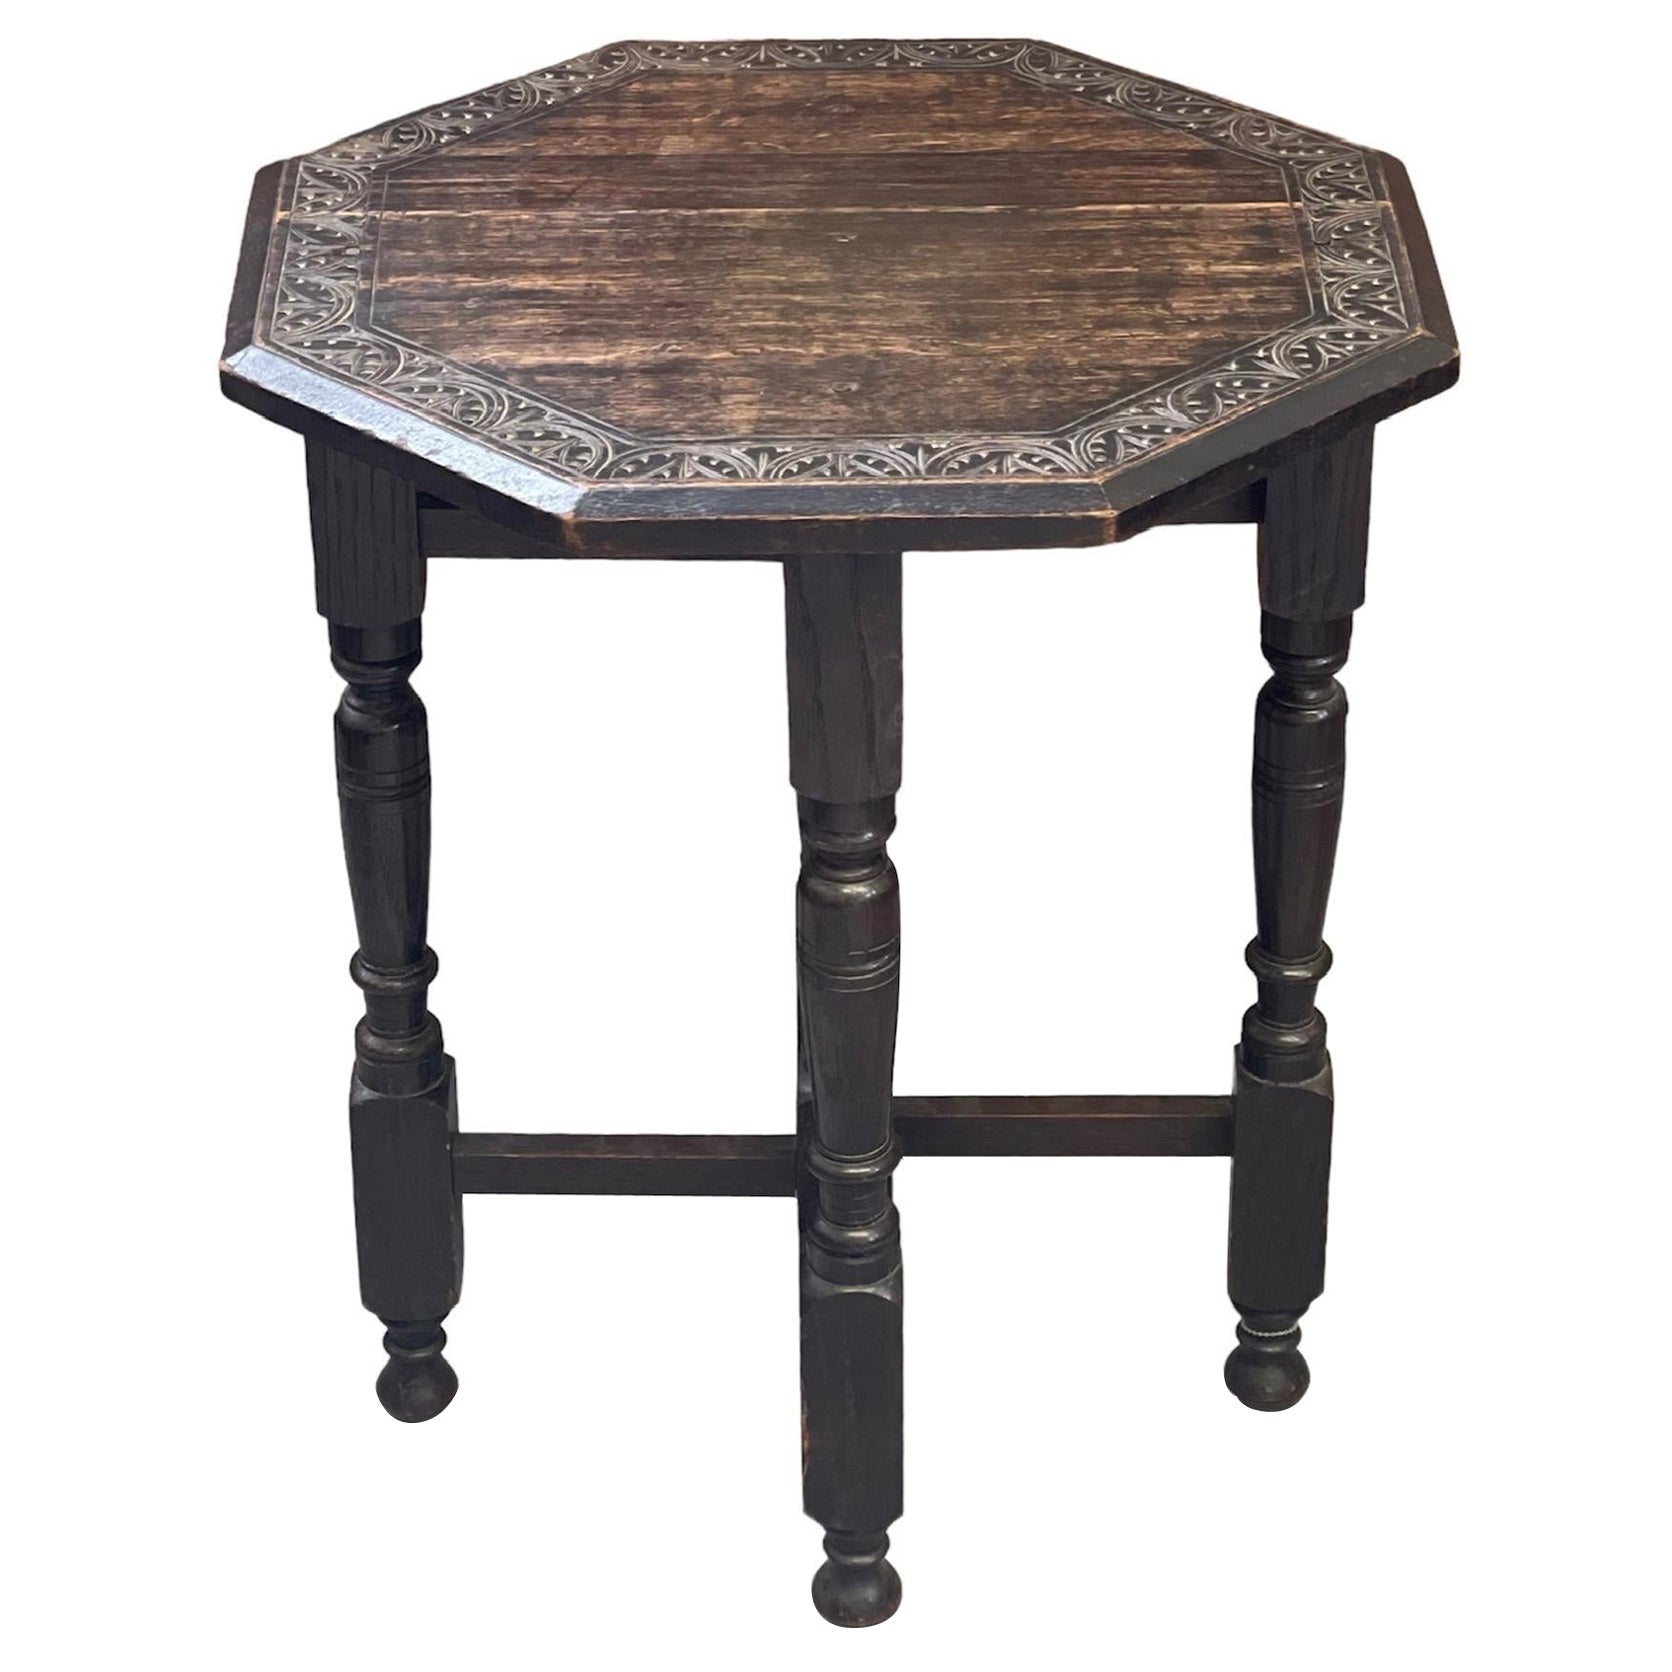 Antique Table Stand, Uk Import For Sale